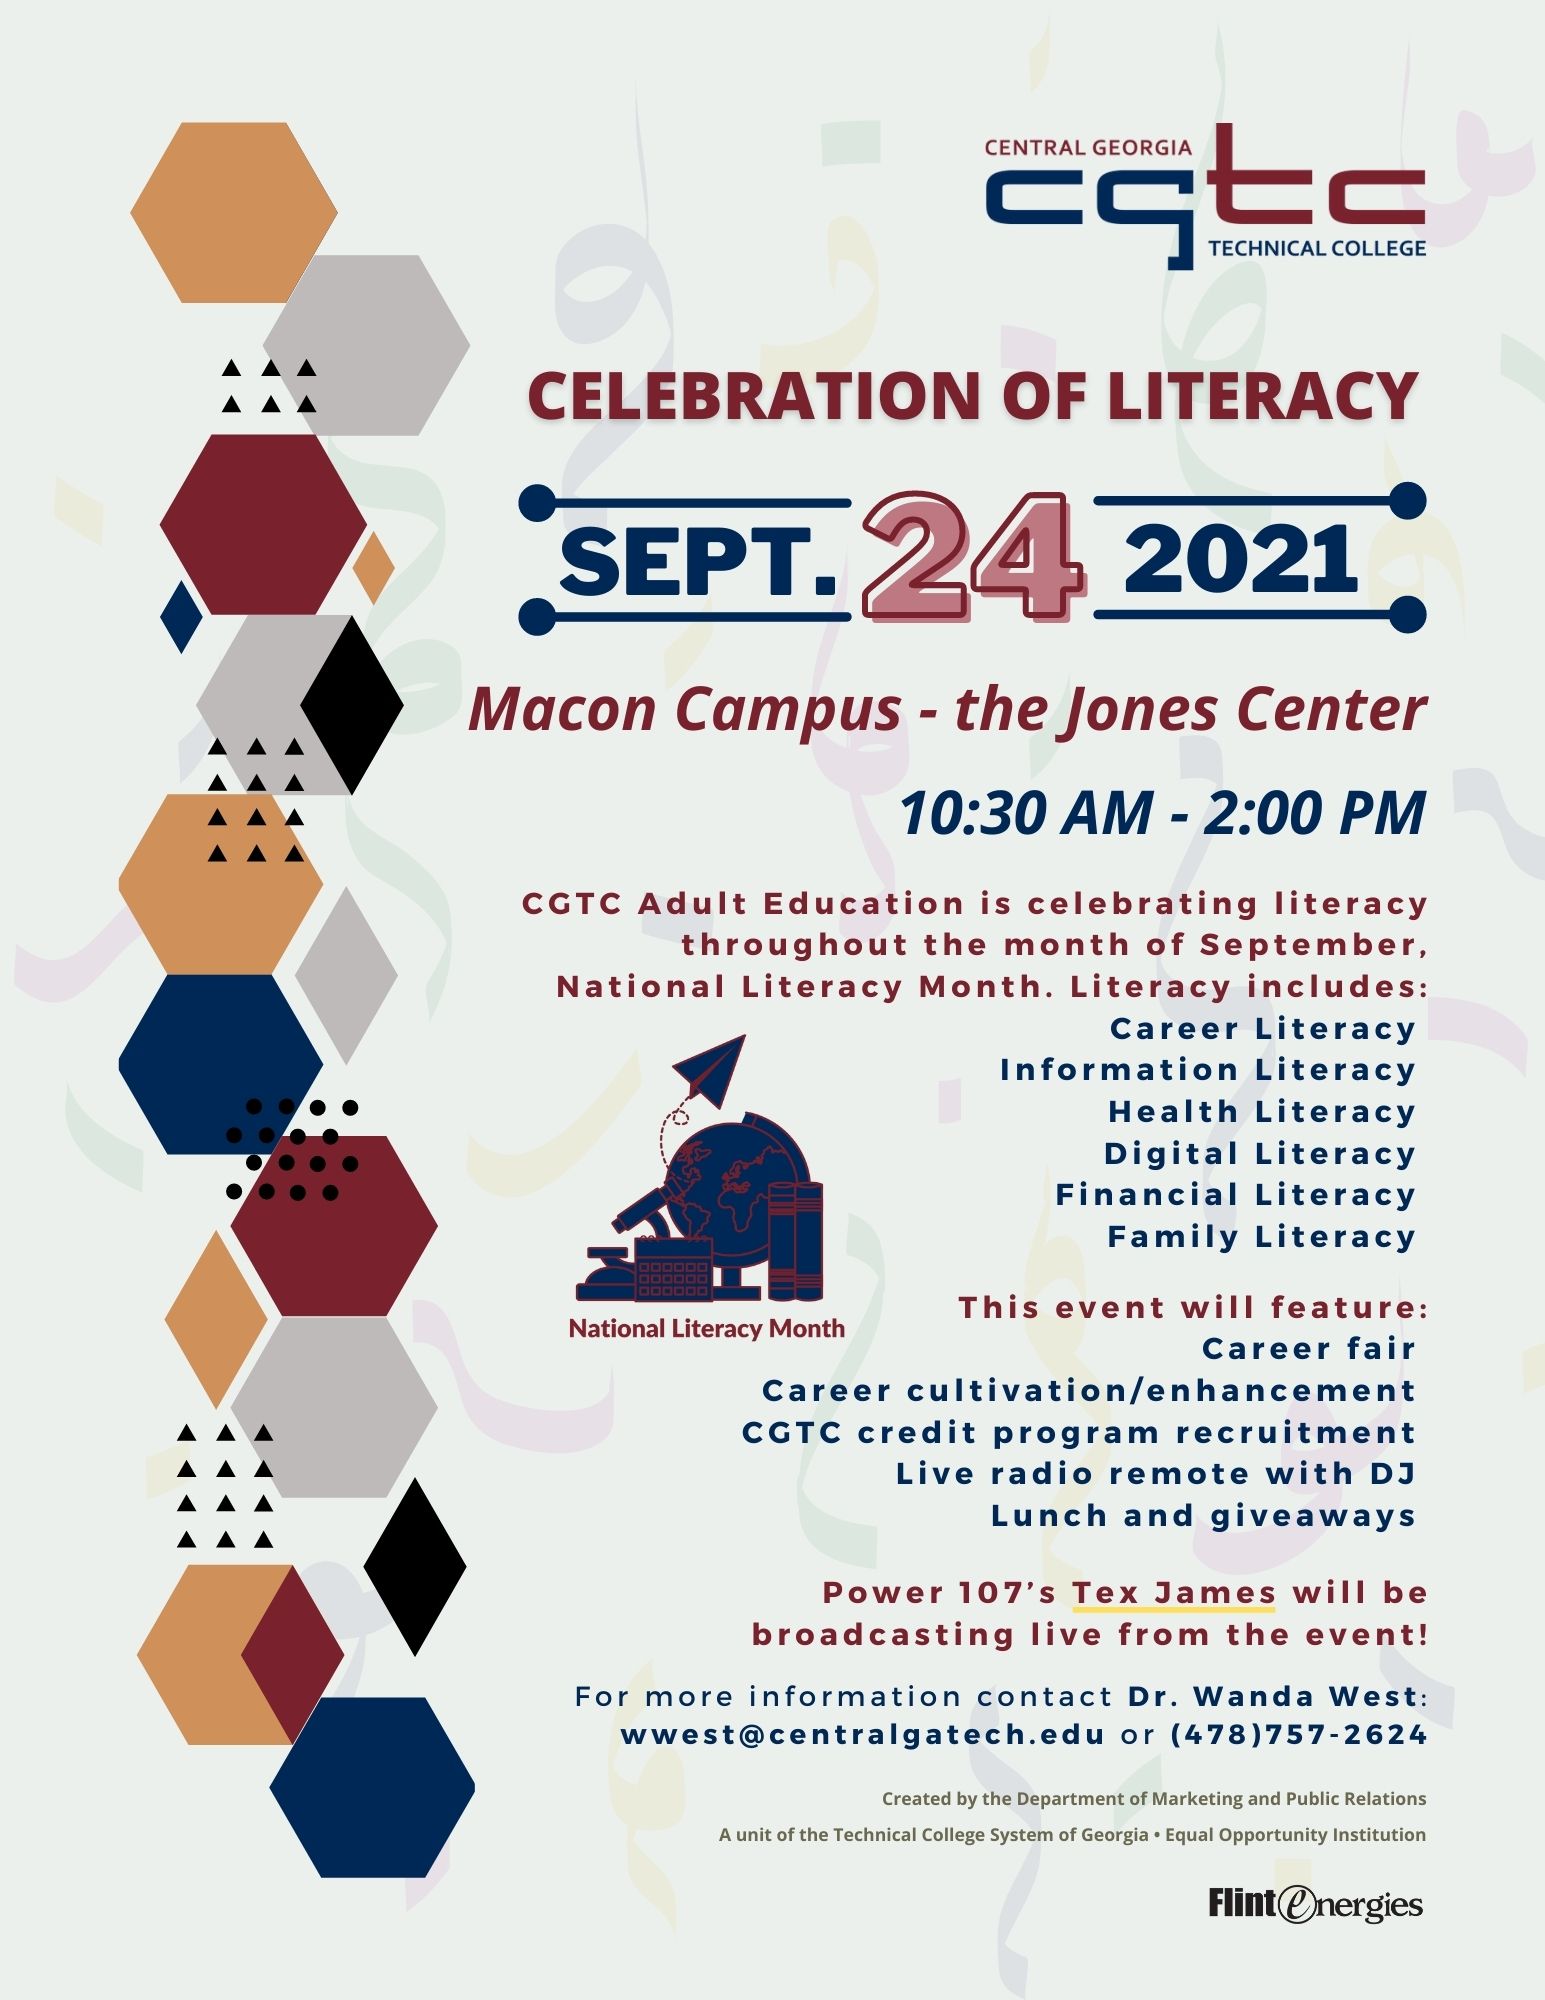 The Central Georgia Technical College (CGTC) Adult Education Division (AED) is celebrating National Literacy Month with its Celebration of Literacy event on September 24, 2021 at the Jones Center of the College’s Macon Campus on 3300 Macon Tech Dr., from 10:30 a.m. to 2:00 p.m.